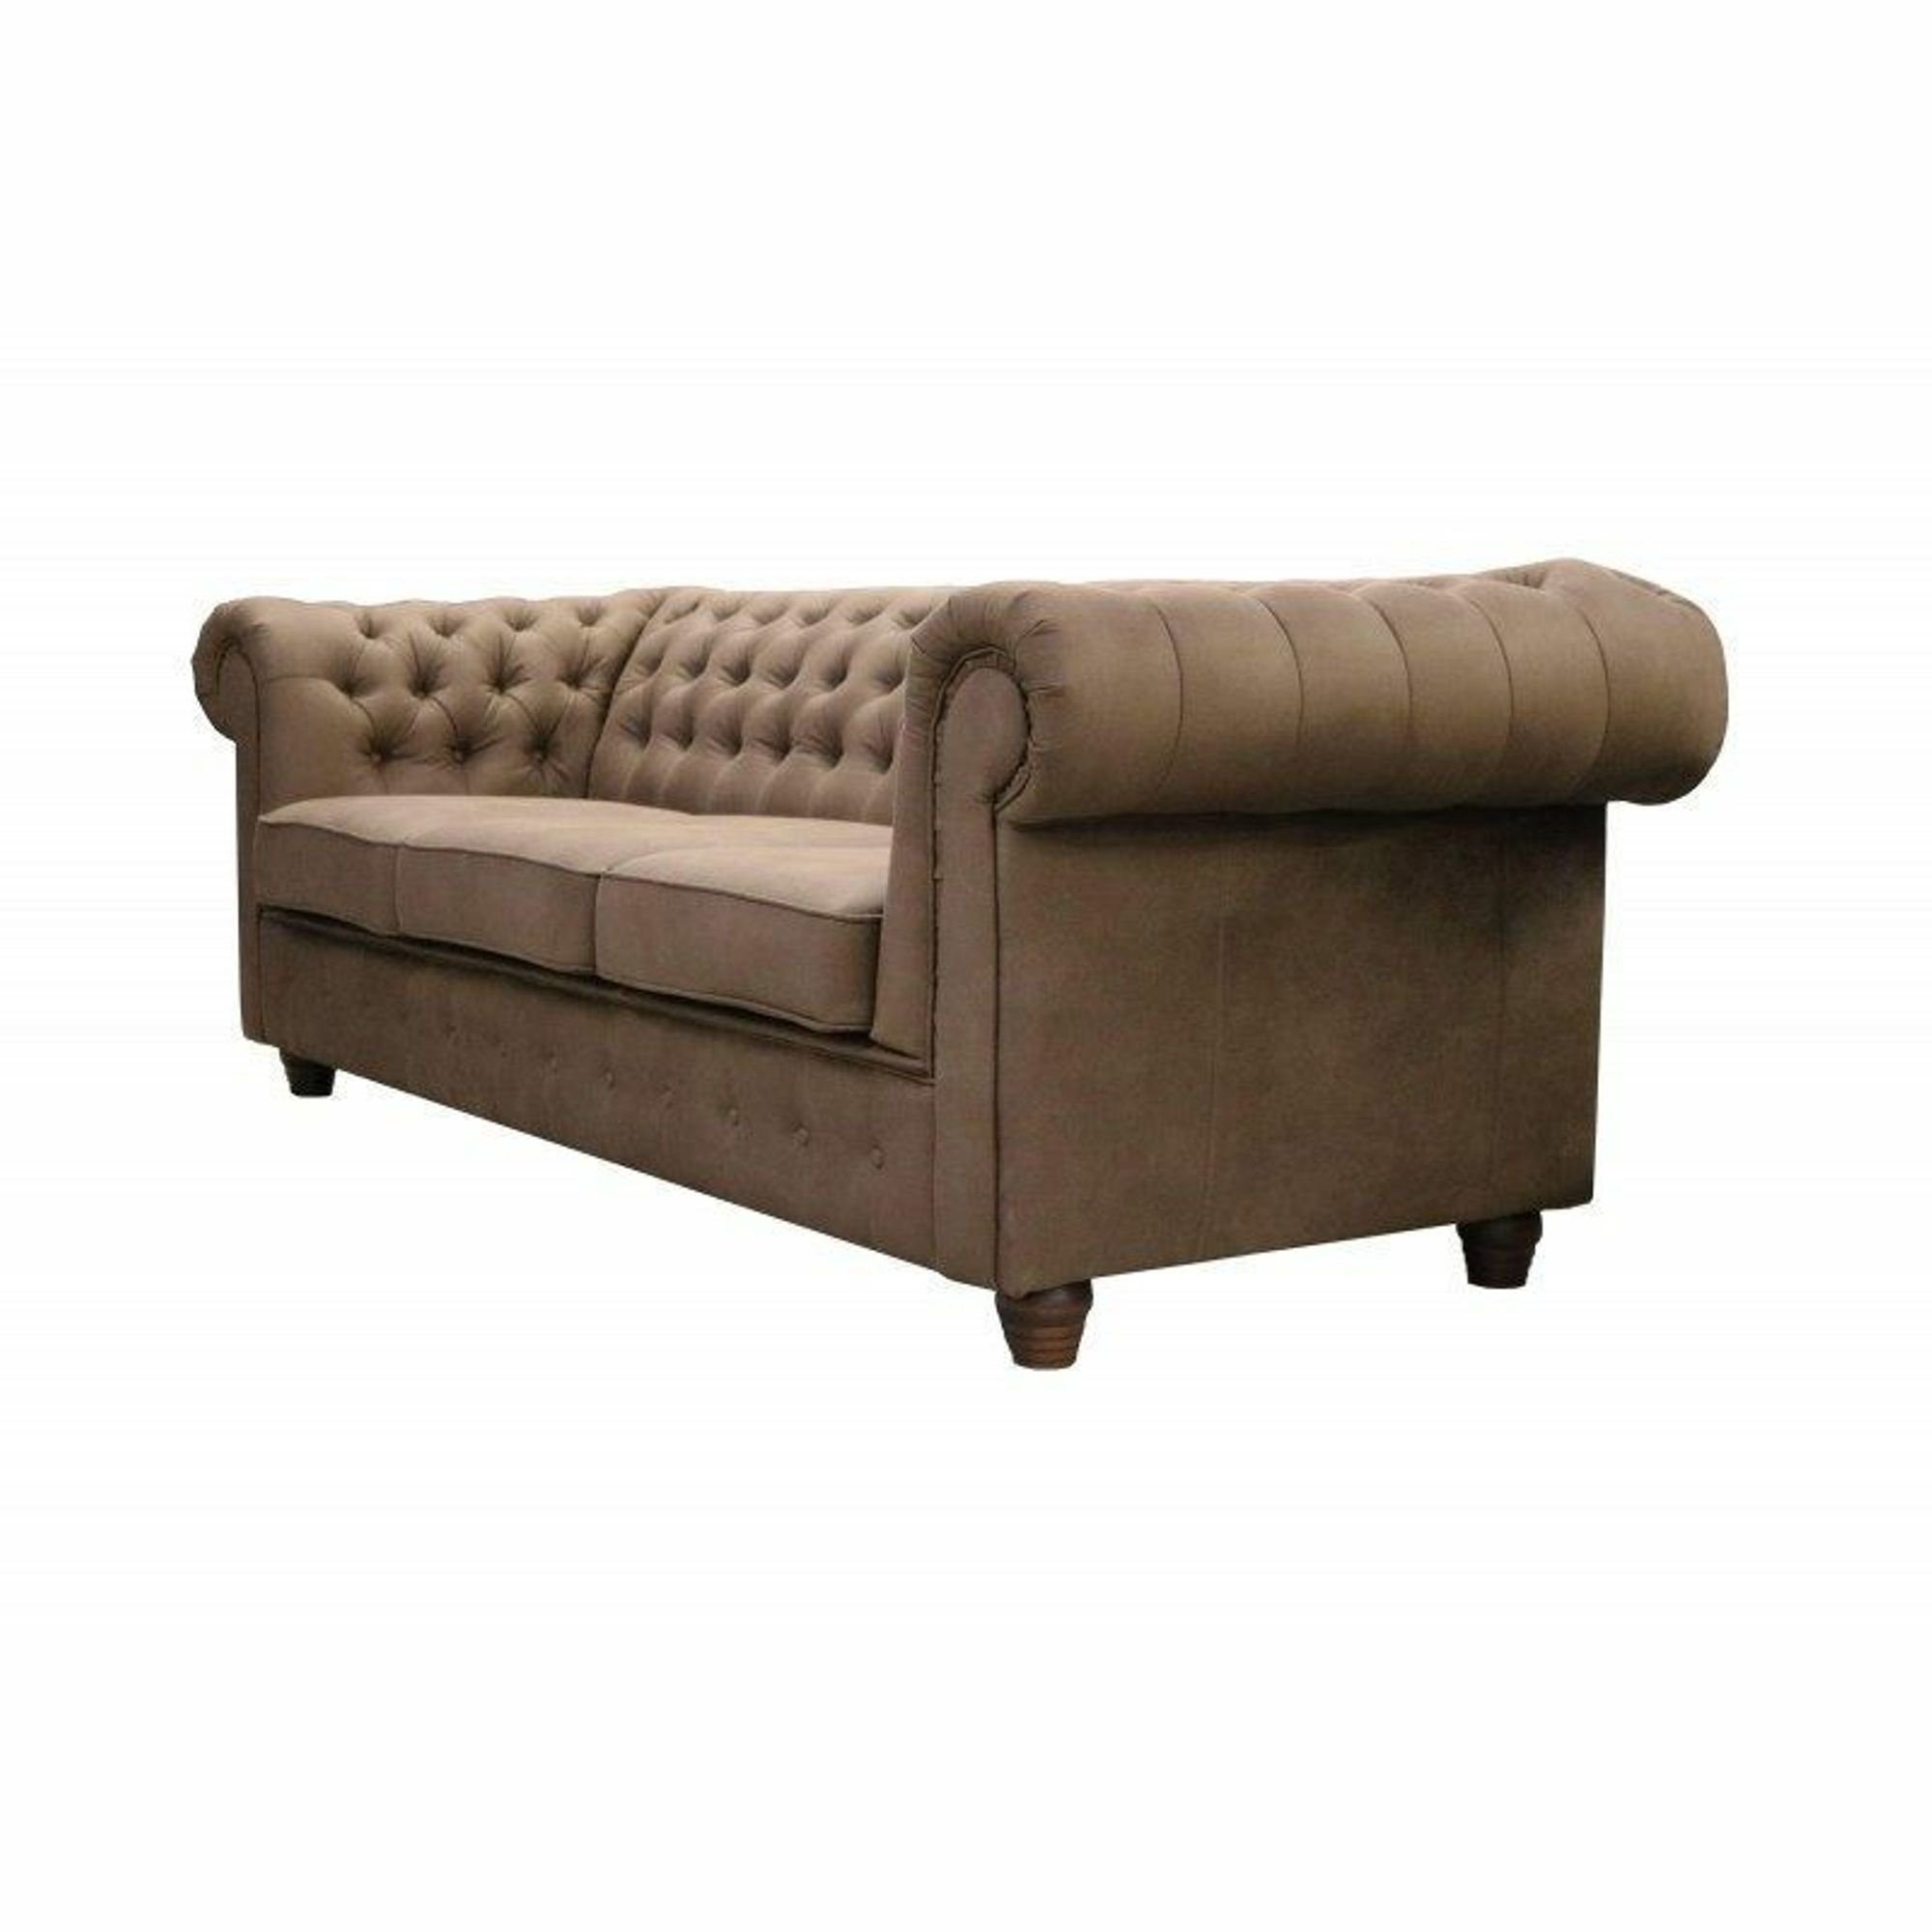 in 3-er luxus Design Chesterfield Couch Made Taupe Chesterfield-Sofa Sofort JVmoebel Neu, Europe Modern